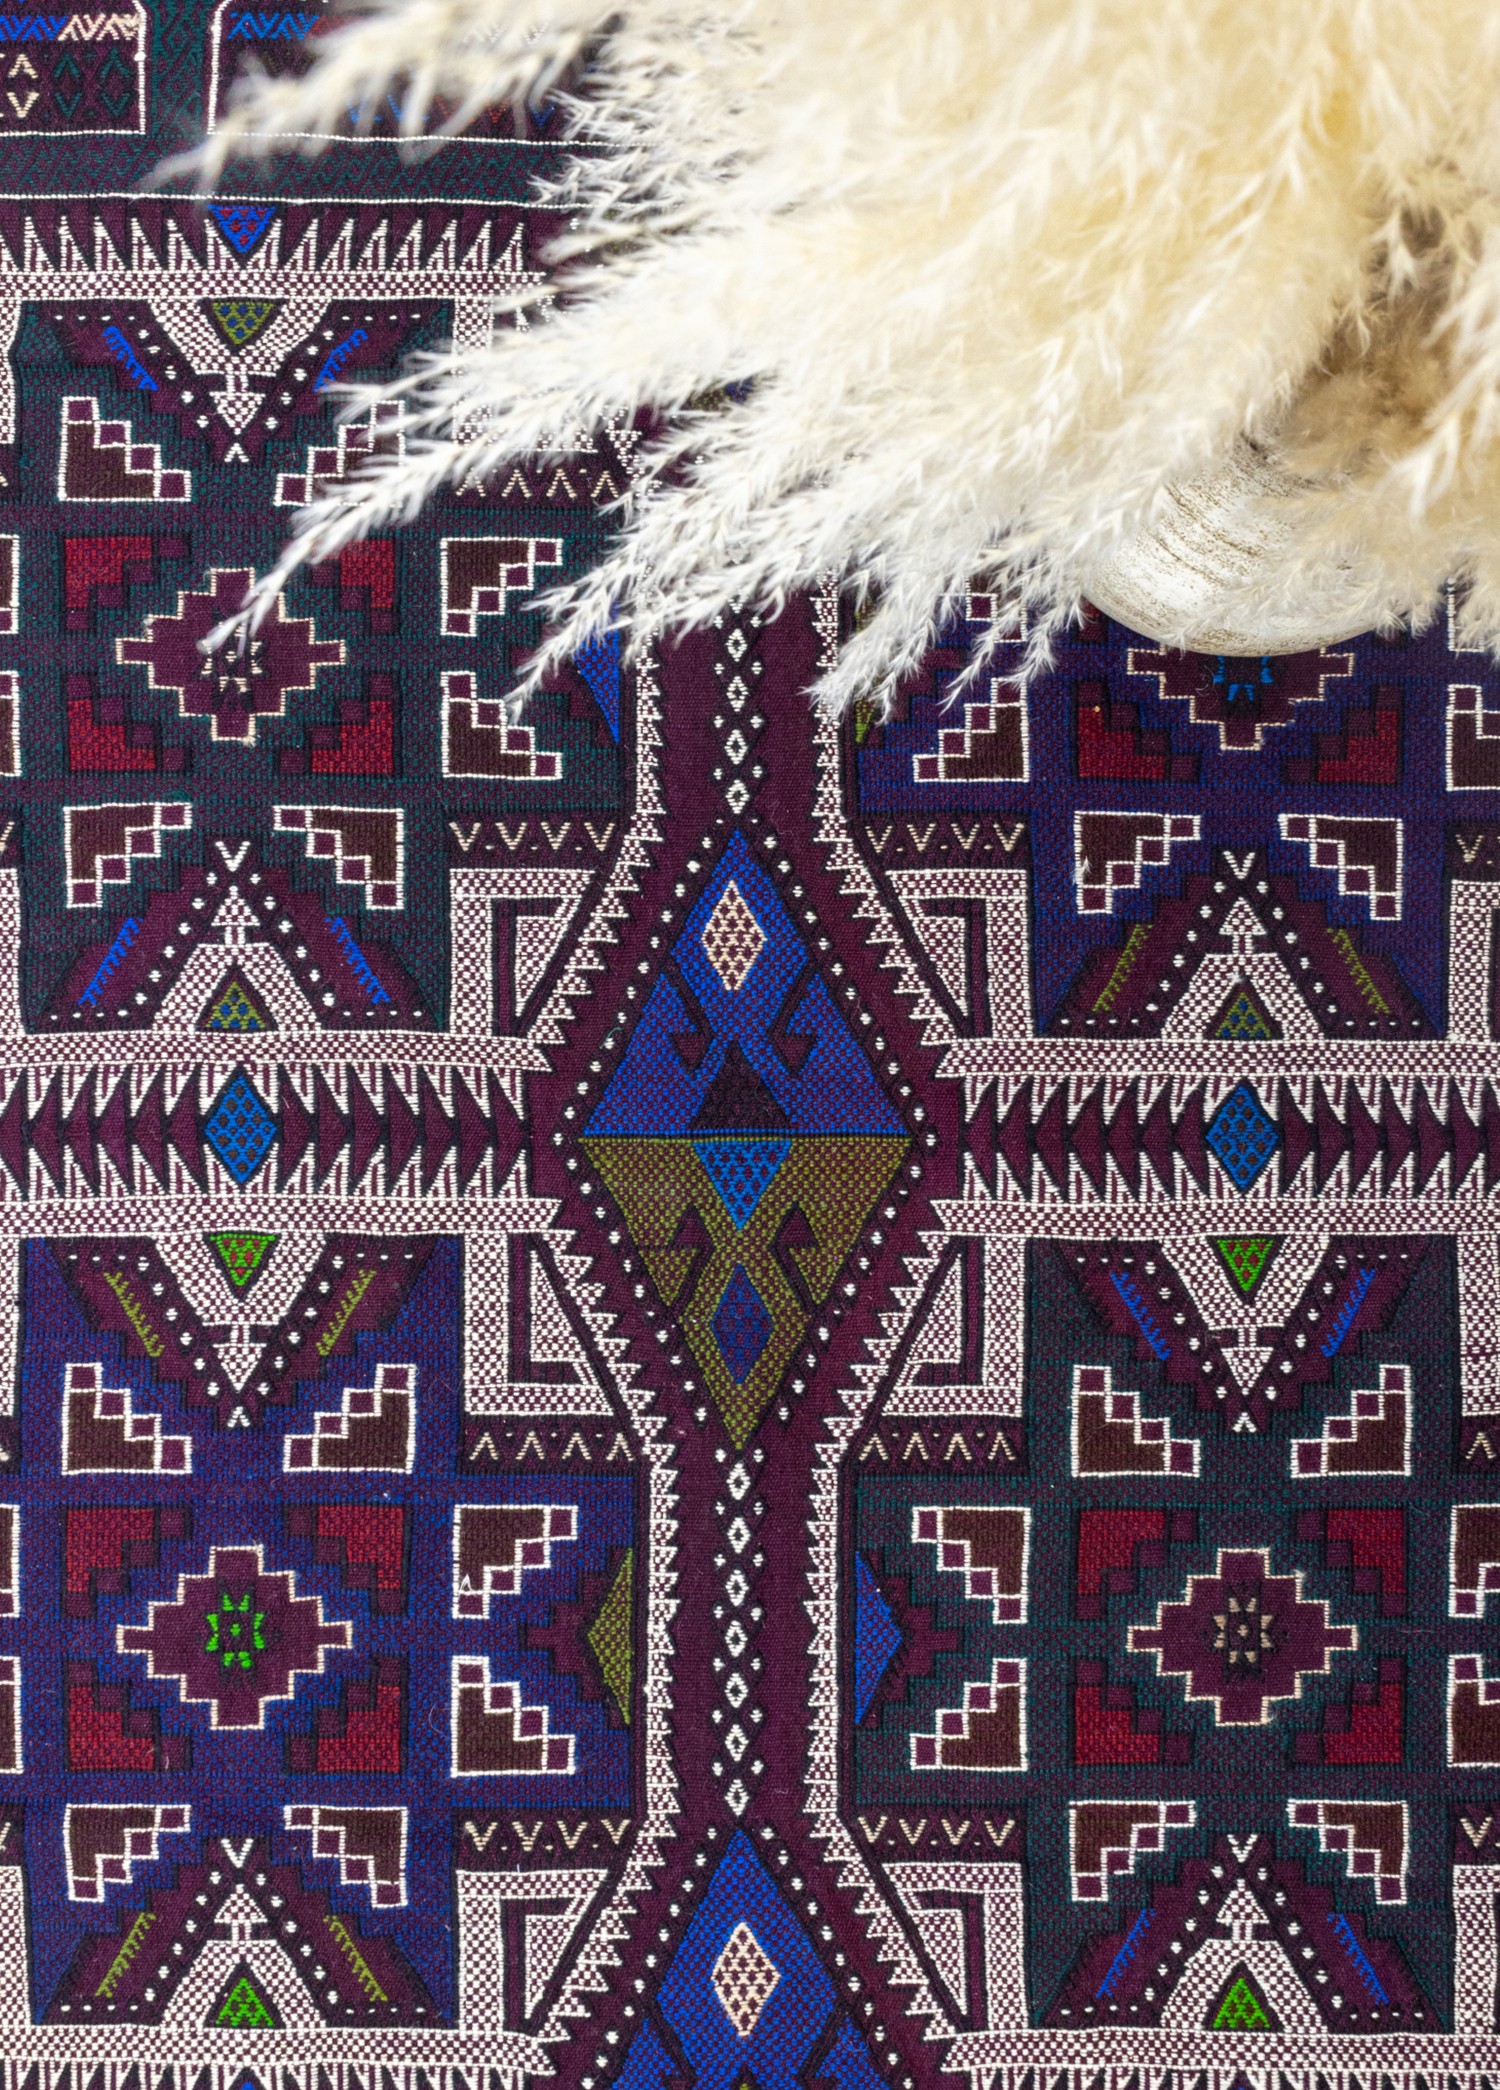 Kilim Motifs and Meanings